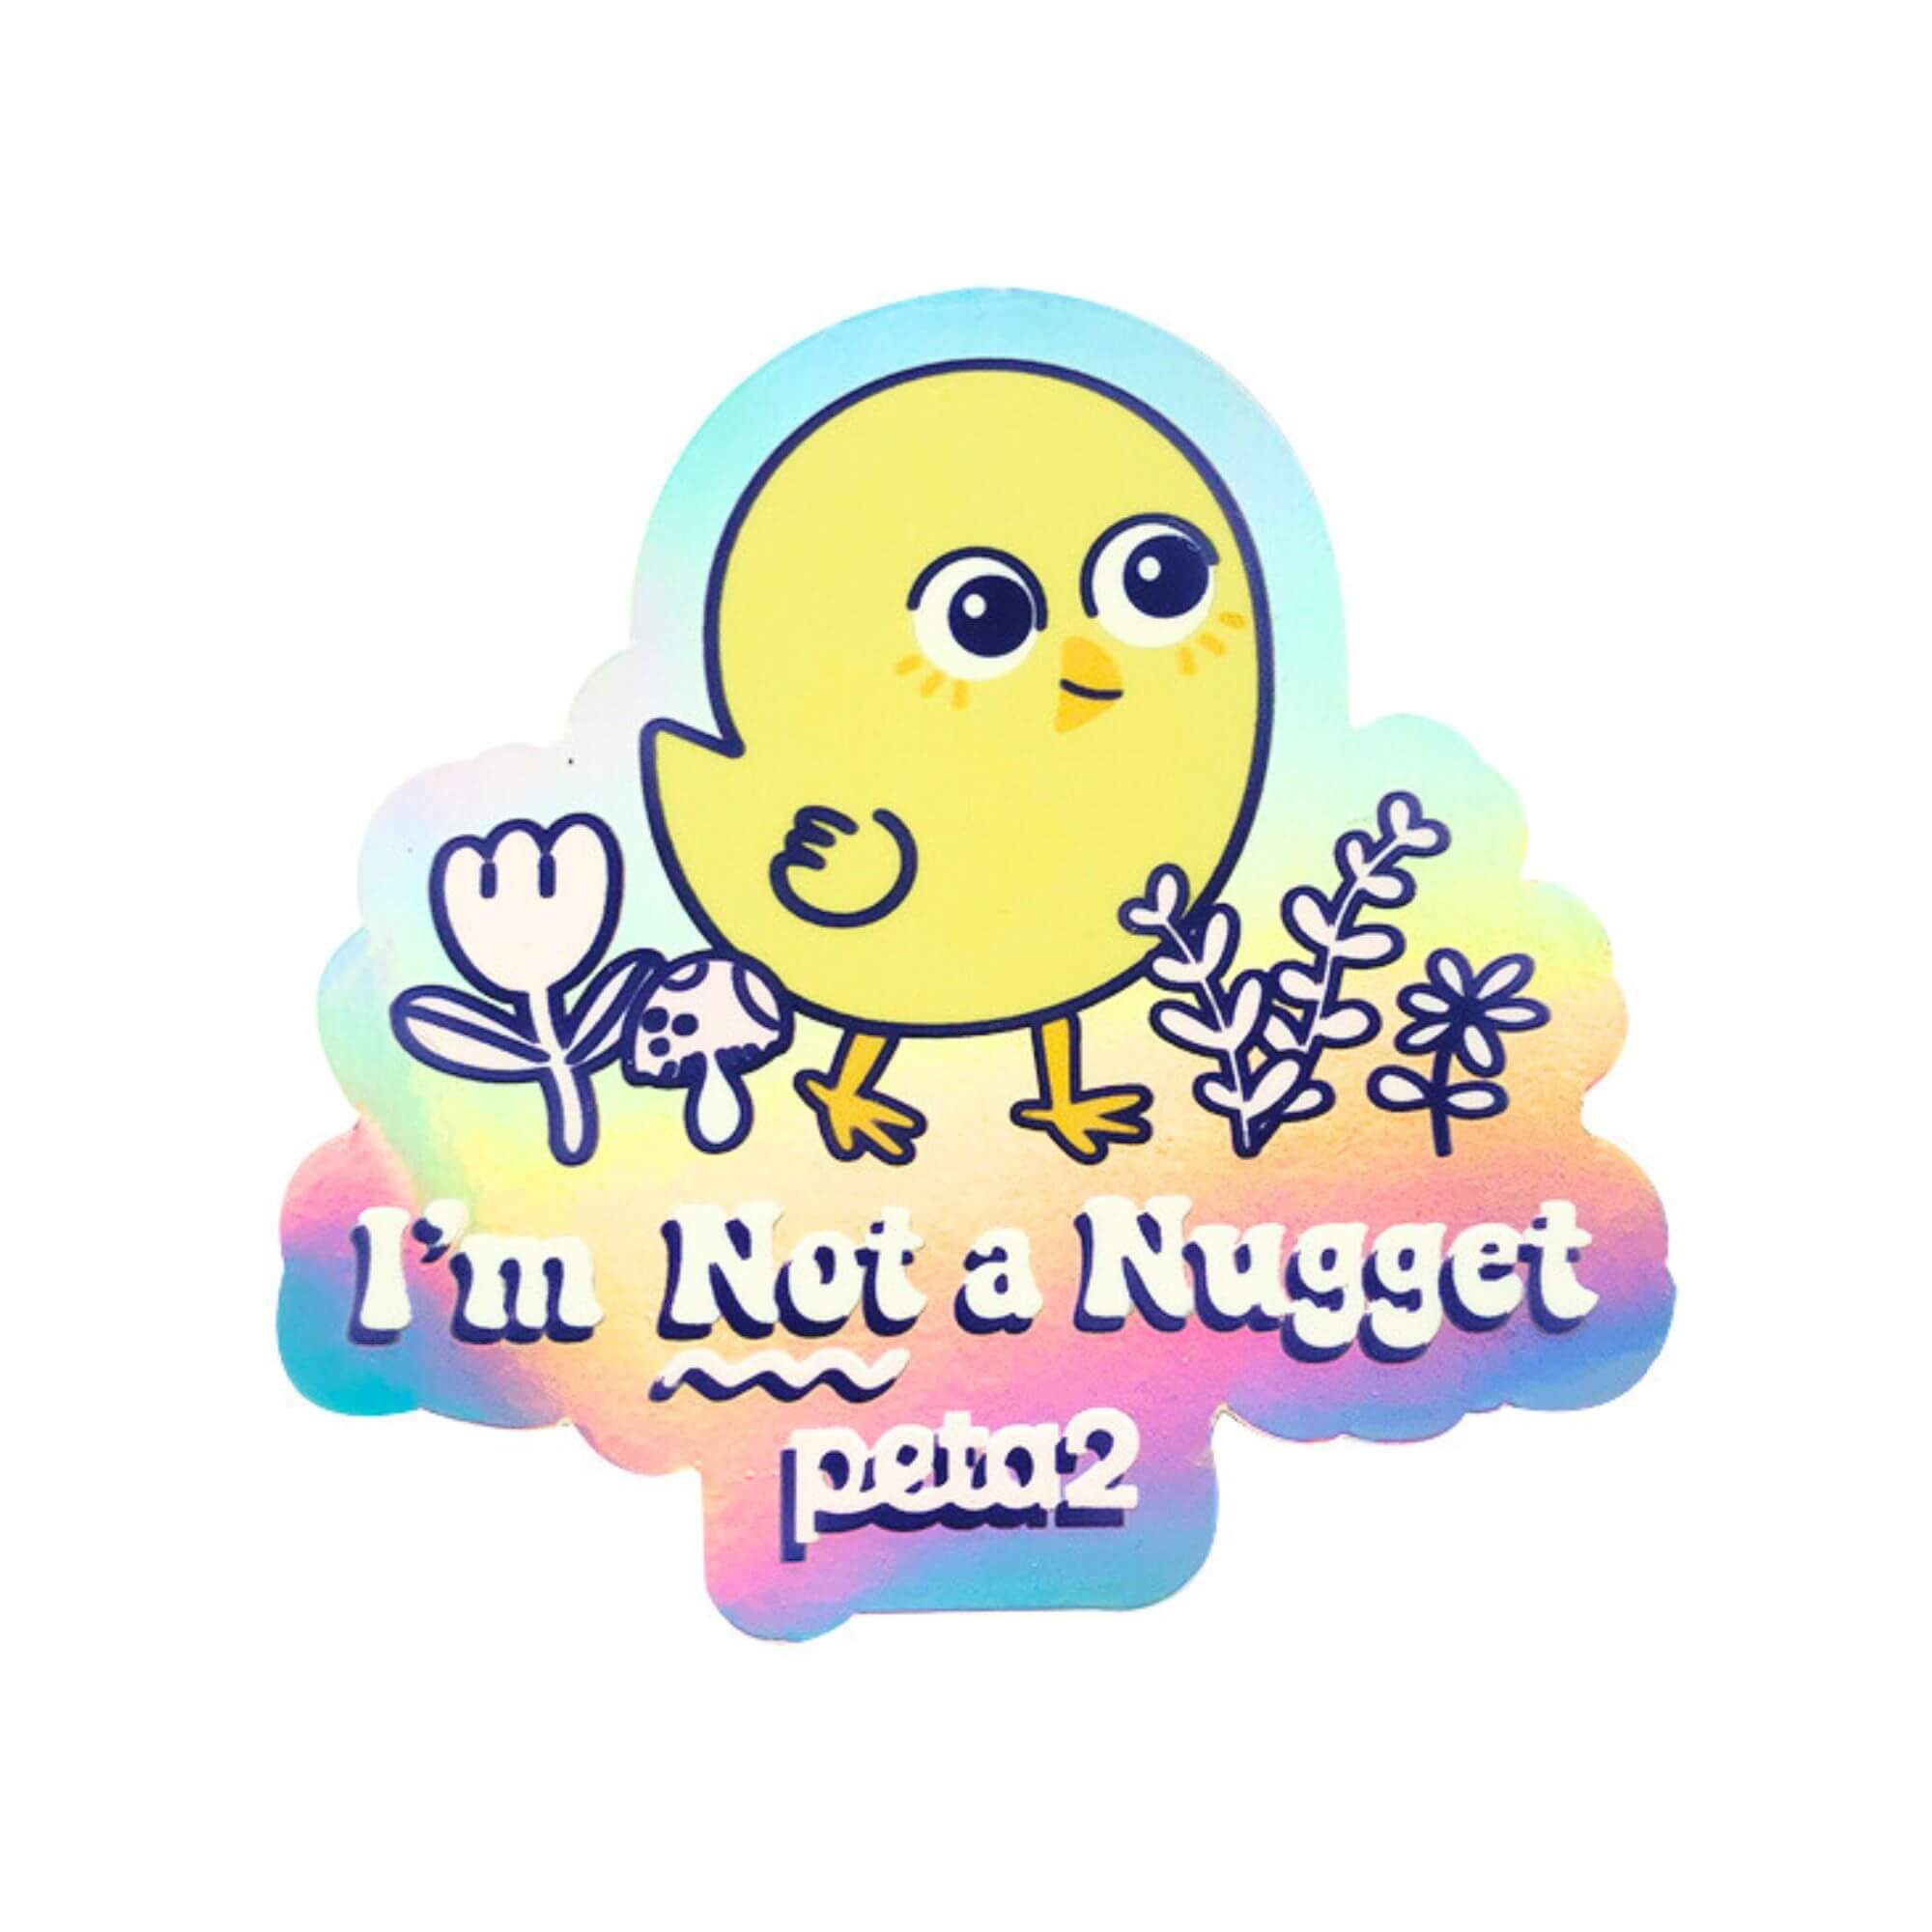 A holographic sticker with Not a Nugget. It reads "I'm Not a Nugget"